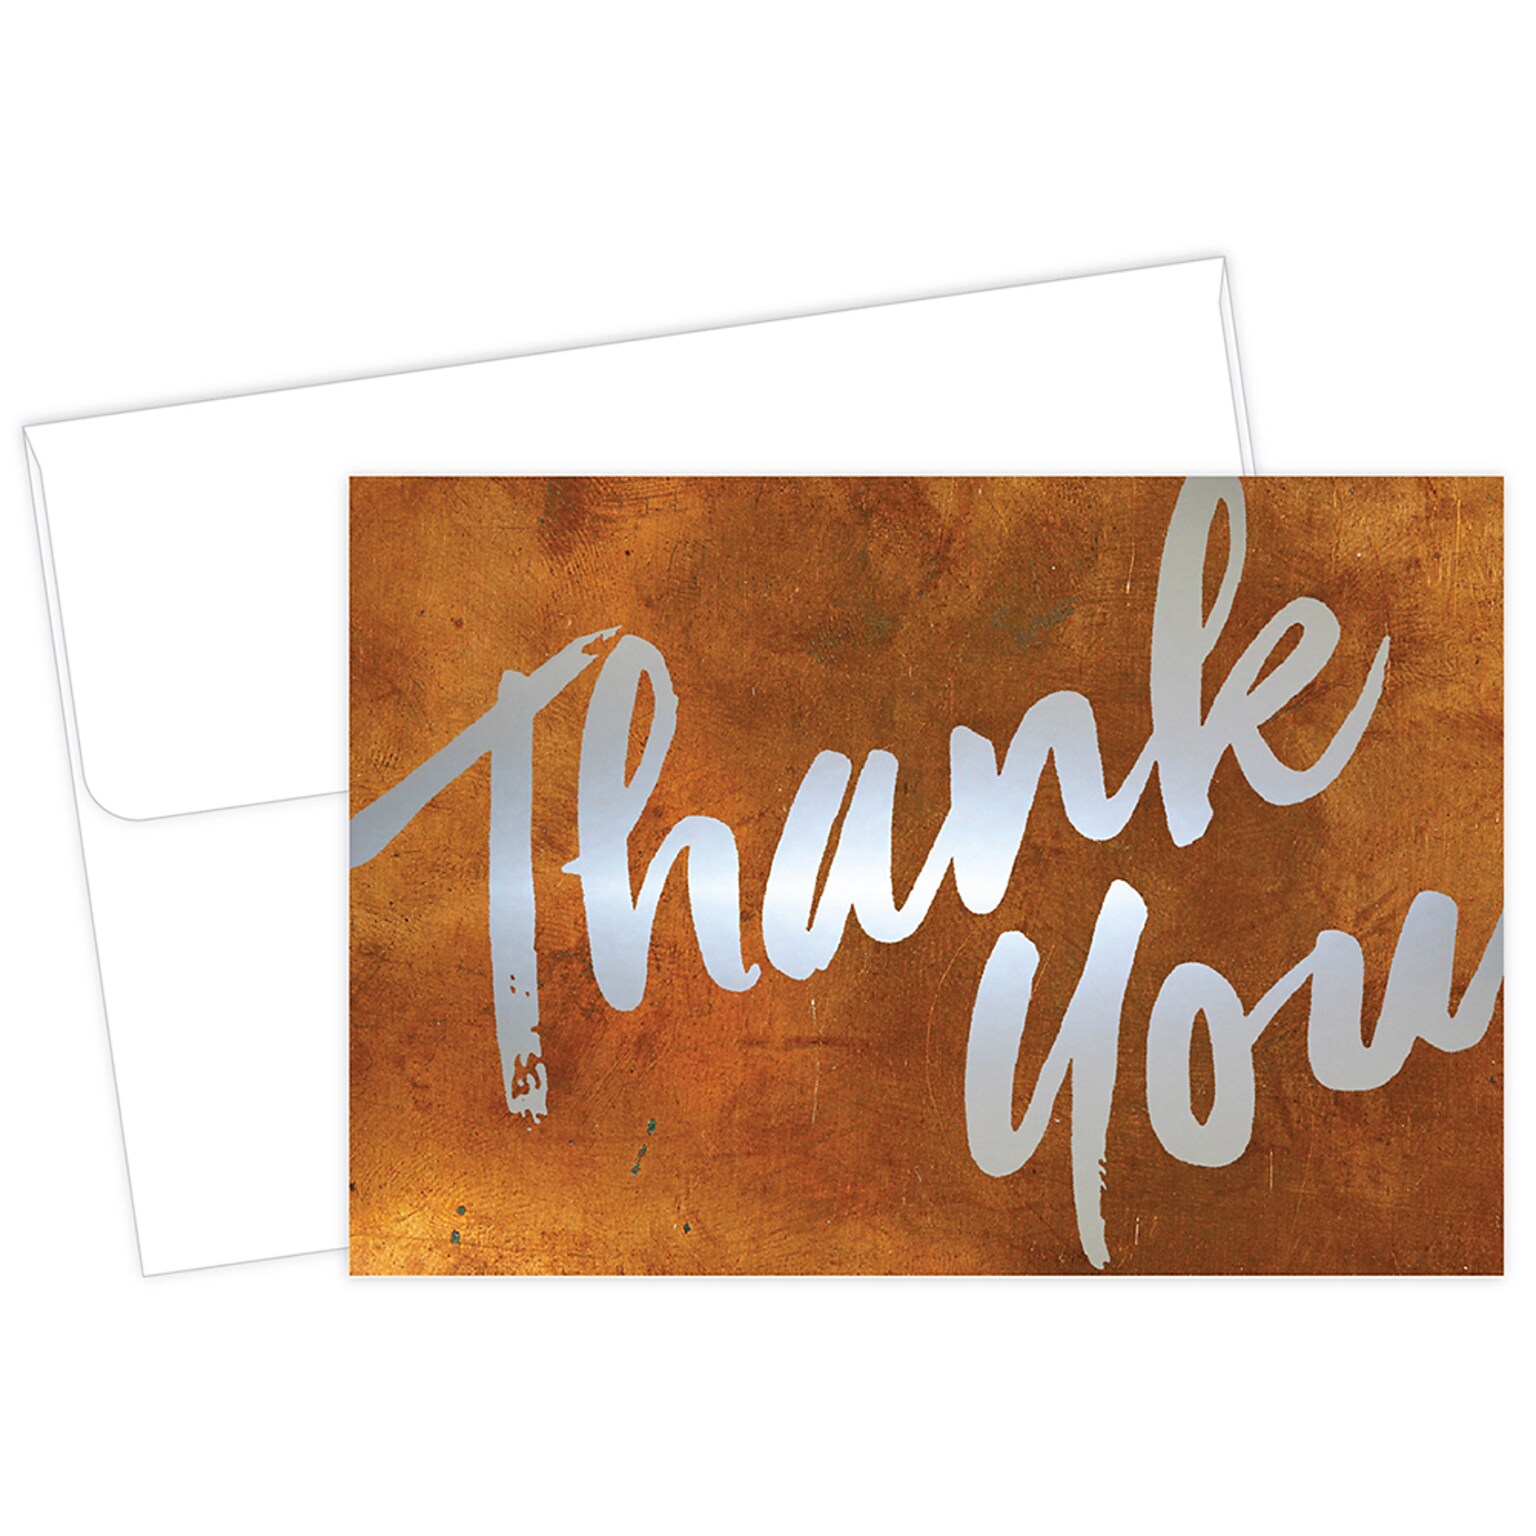 Masterpiece Studios Great Papers!® Copper Wall with Silver Foil Thank You Note Card, 4.875H x 3.35W, 50 count (2017054)